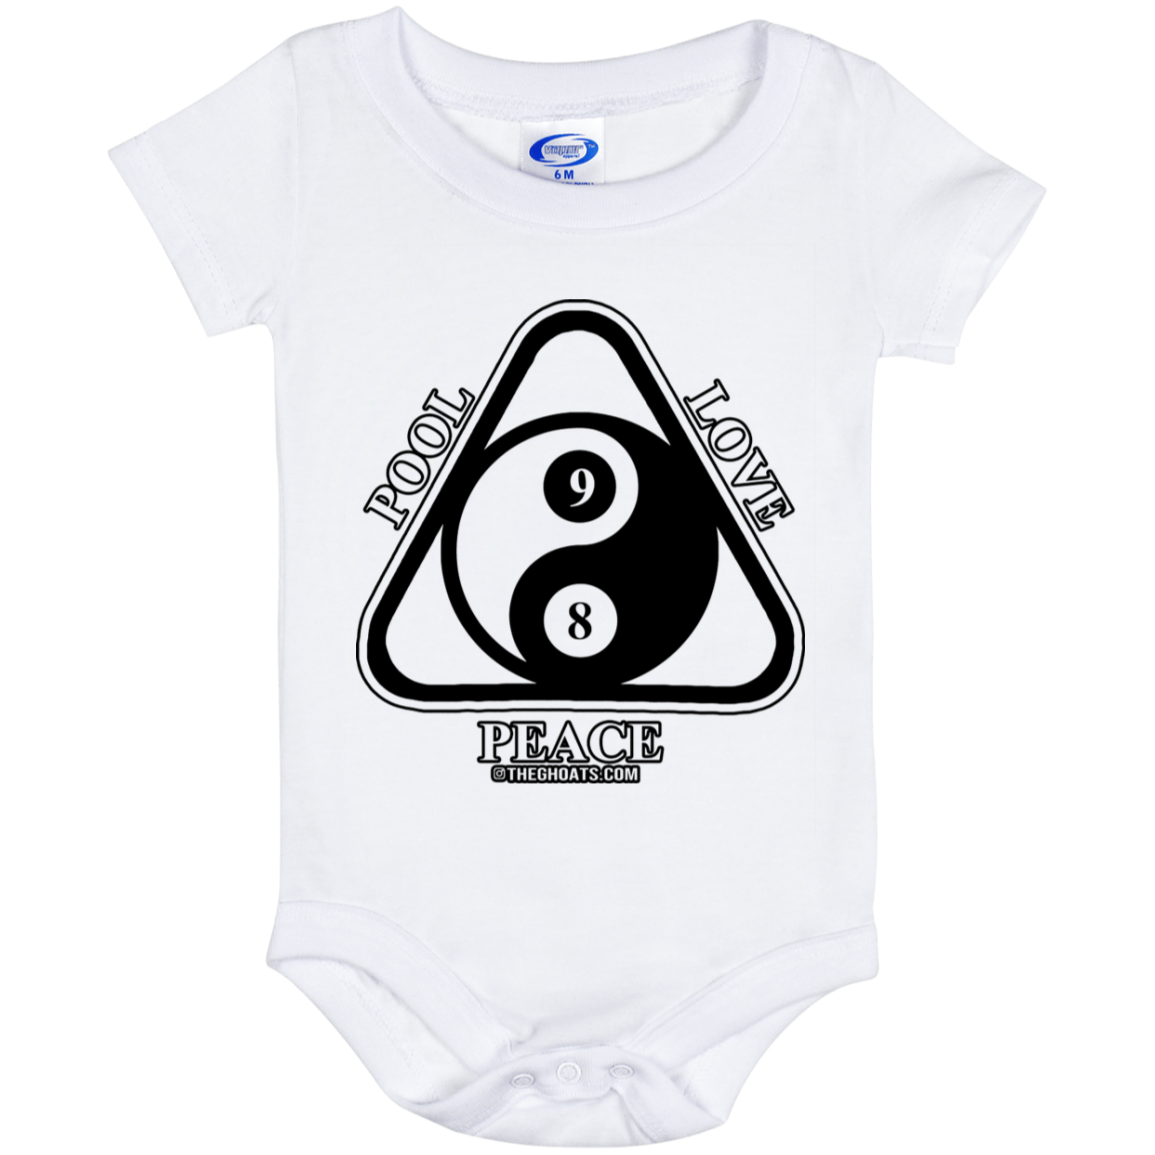 The GHOATS Custom Design #9. Ying Yang. Pool Love Peace. Baby Onesie 6 Month